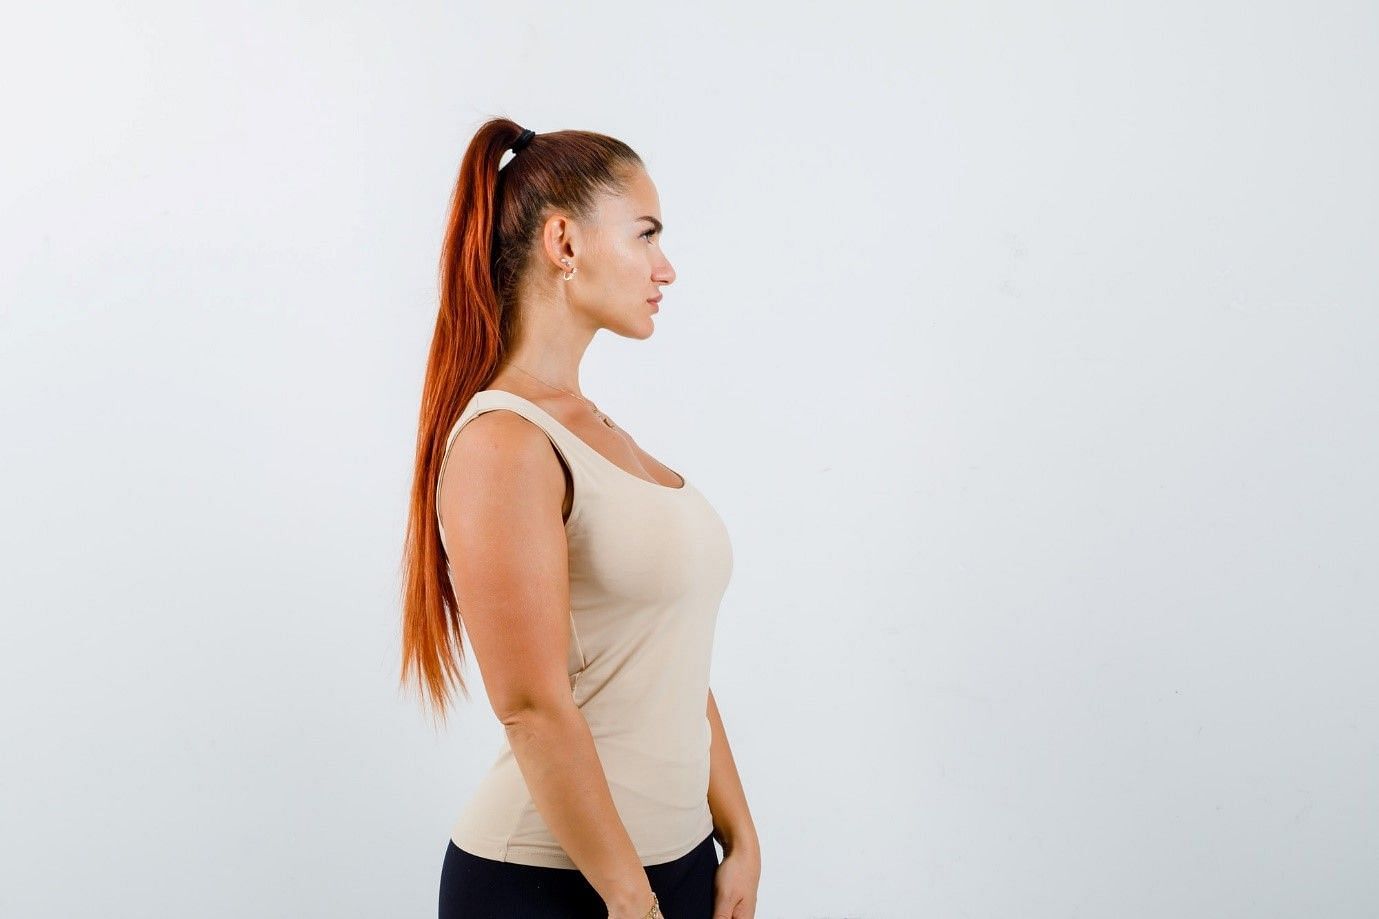 Support of joints is crucial in improving posture while moving (image by 8photo on freepik)